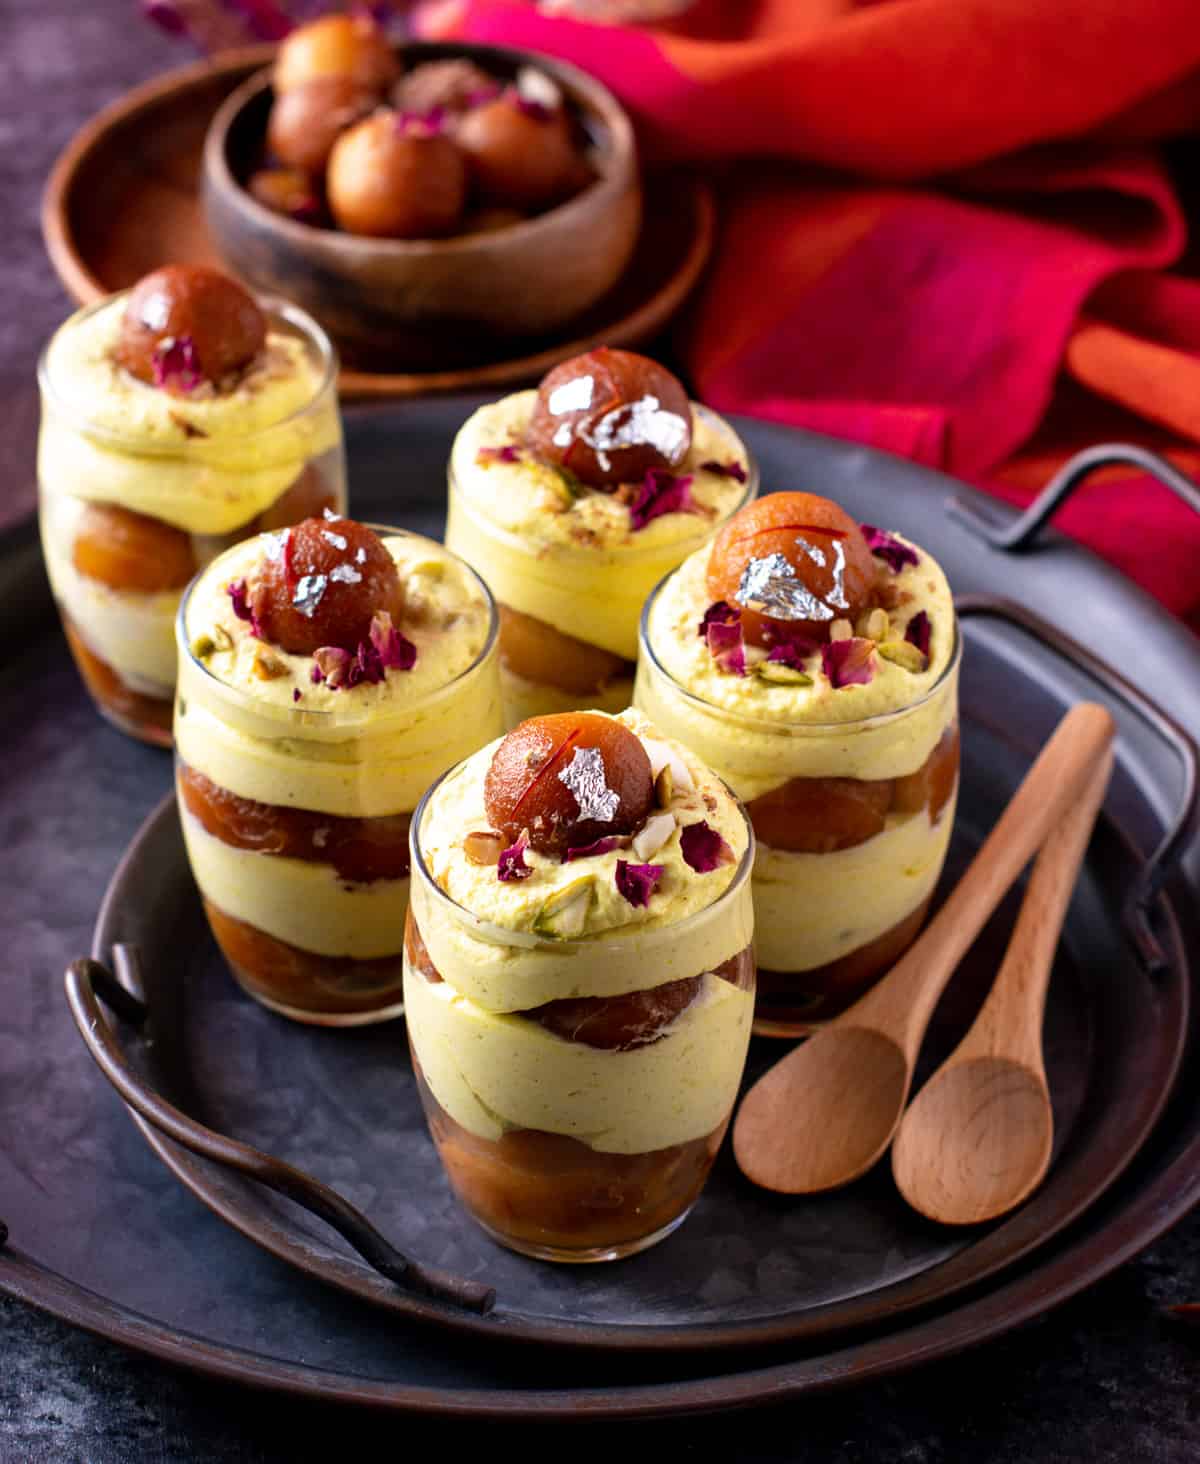 Gulab jamun thandai mousse served layered in glasses